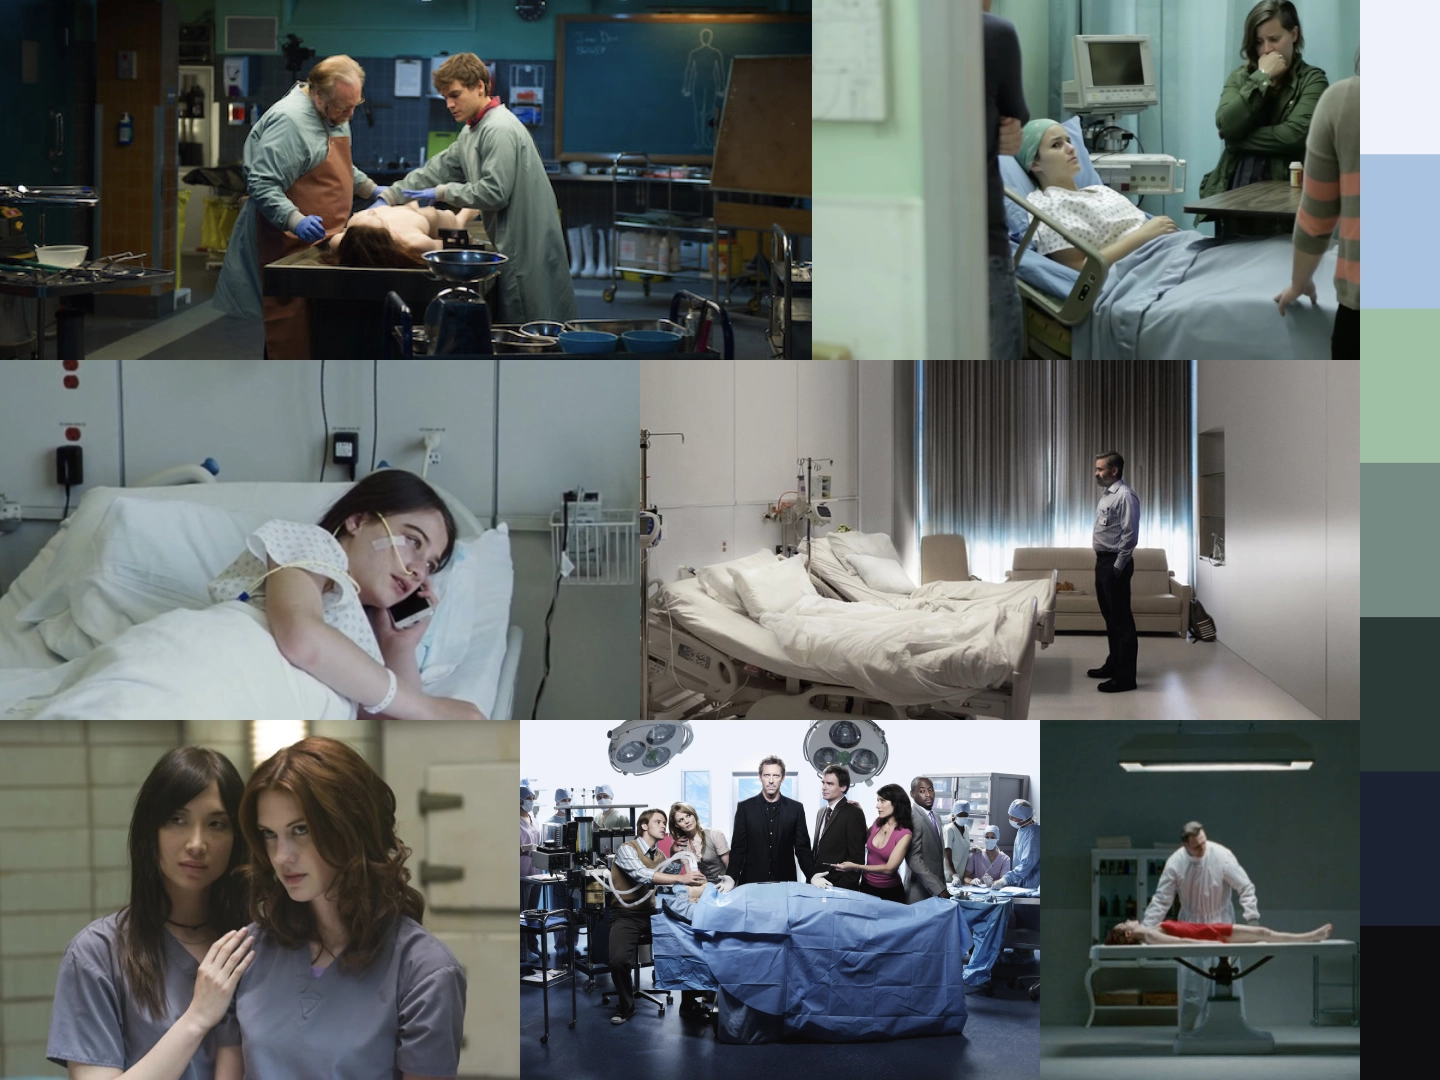 A collage of various hospital settings portrayed in film and
TV.